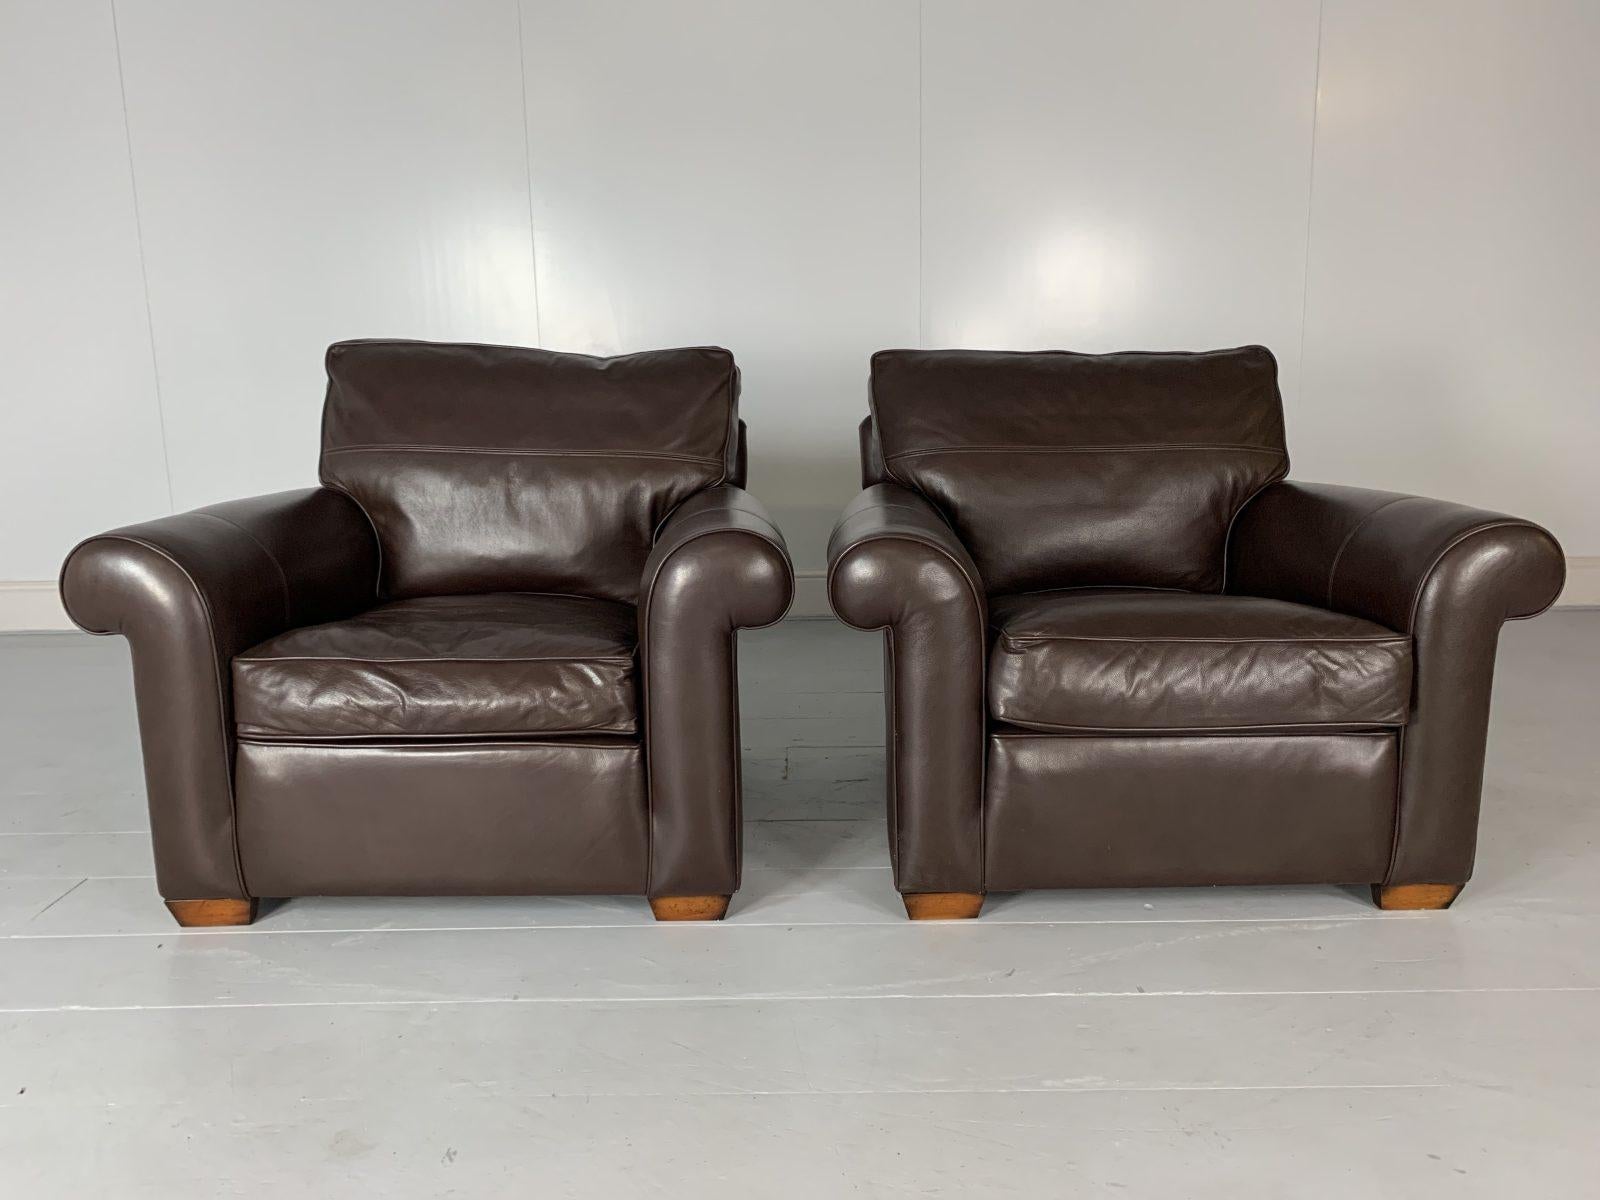 Hello Friends, and welcome to Lord Browns, the UK’s premier destination for fine, preloved seating.

On offer on this occasion is an irresistibly-handsome identical pair of Duresta “Scroll-Arm” large armchairs, both dressed in their peerless